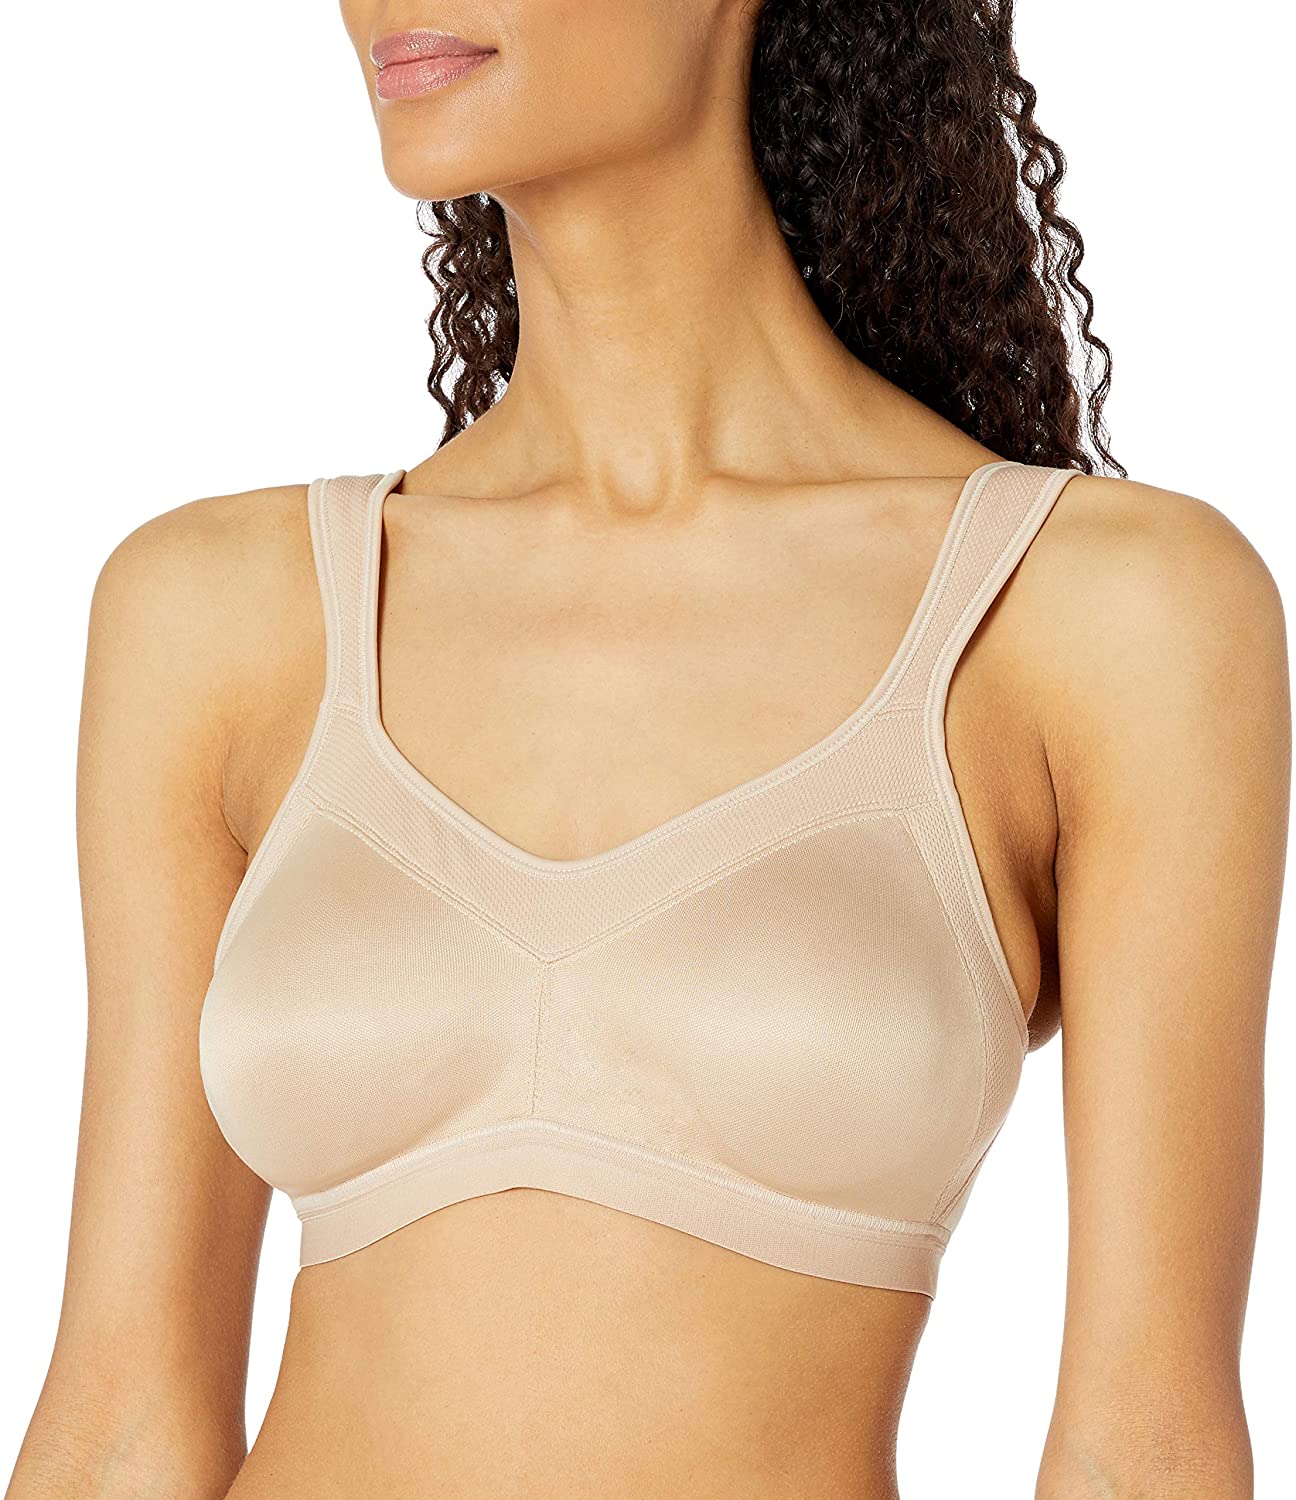 Playtex Women's 18 Hour Active Lifestyle Full Coverage Light Beige